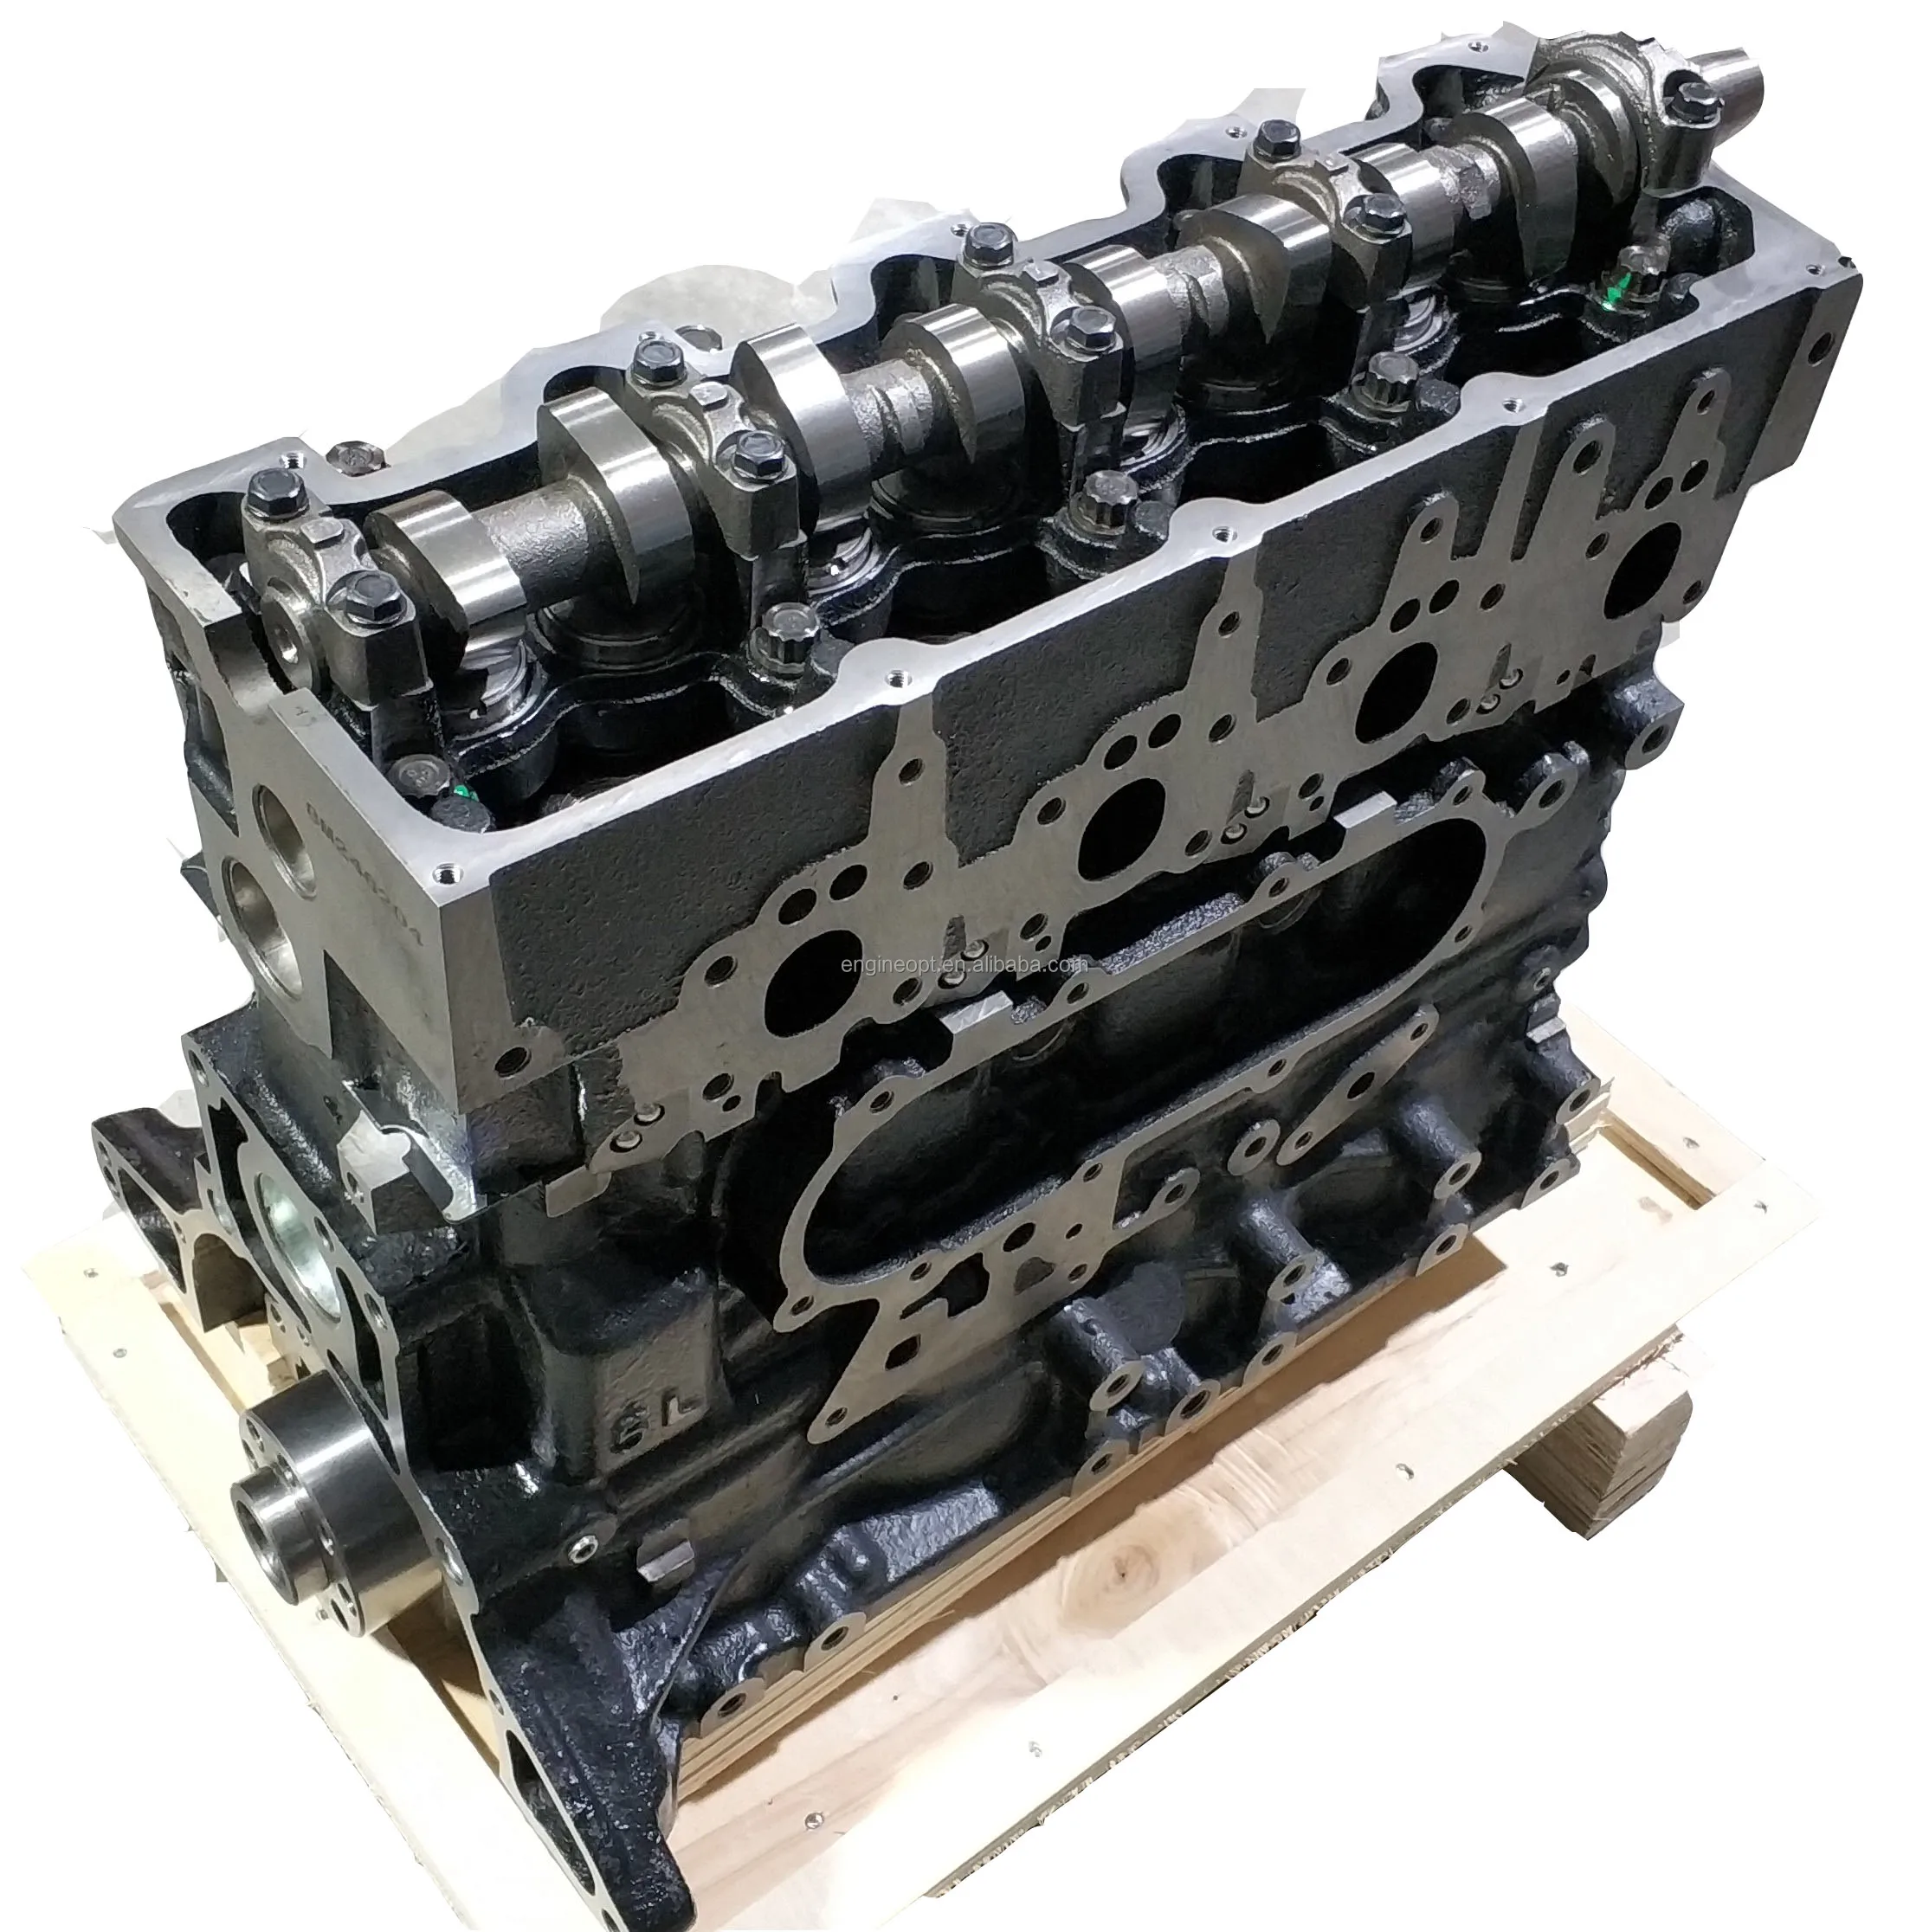 Droogte Tussendoortje innovatie Opt New 2l 2l2 2lt 3l 5l 5le Diesel Bare Engine For Toyota Hilux Hiace  Prado Engine - Buy Toyota 3l Engine Manual,New Engine For Toyota Car,5l  Engine Long Block Product on